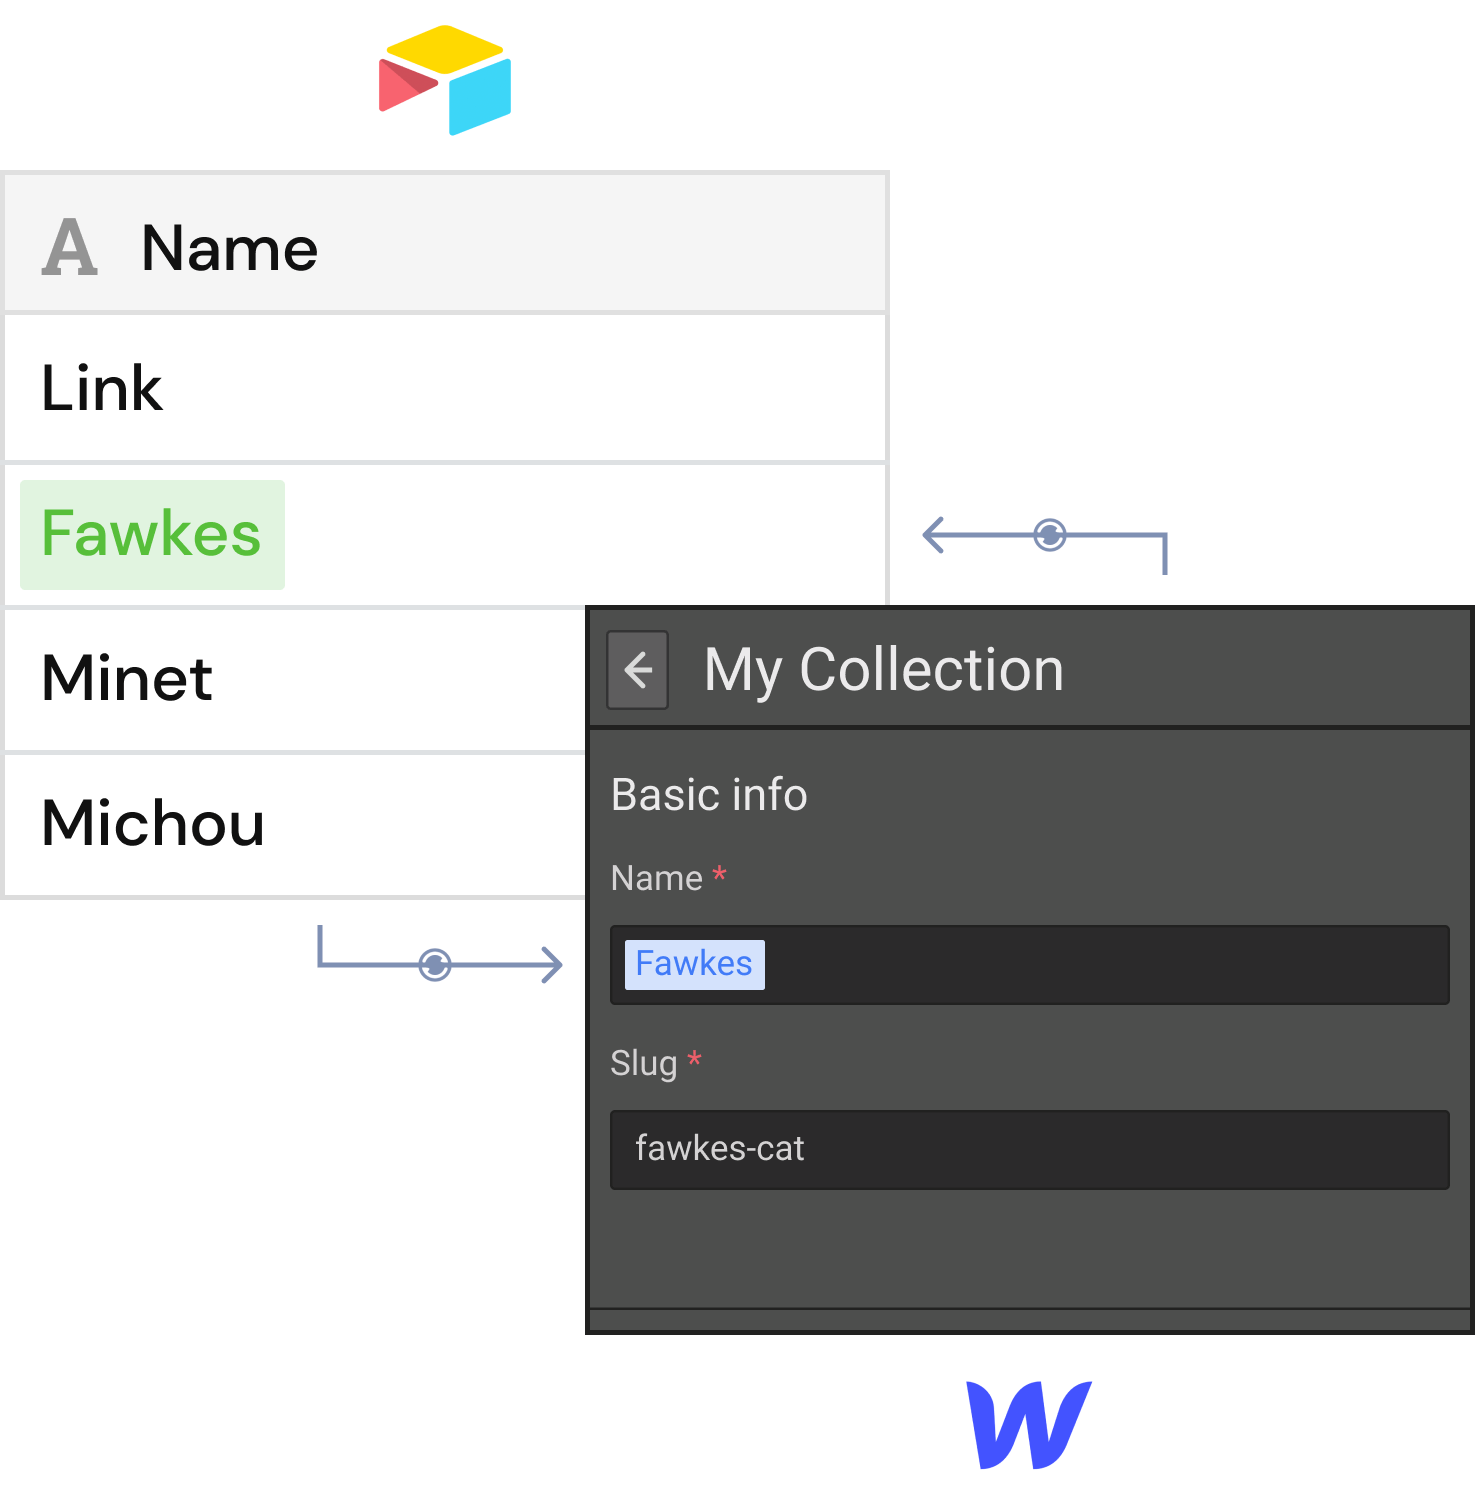 "Fawkes" name shown in Whalesync